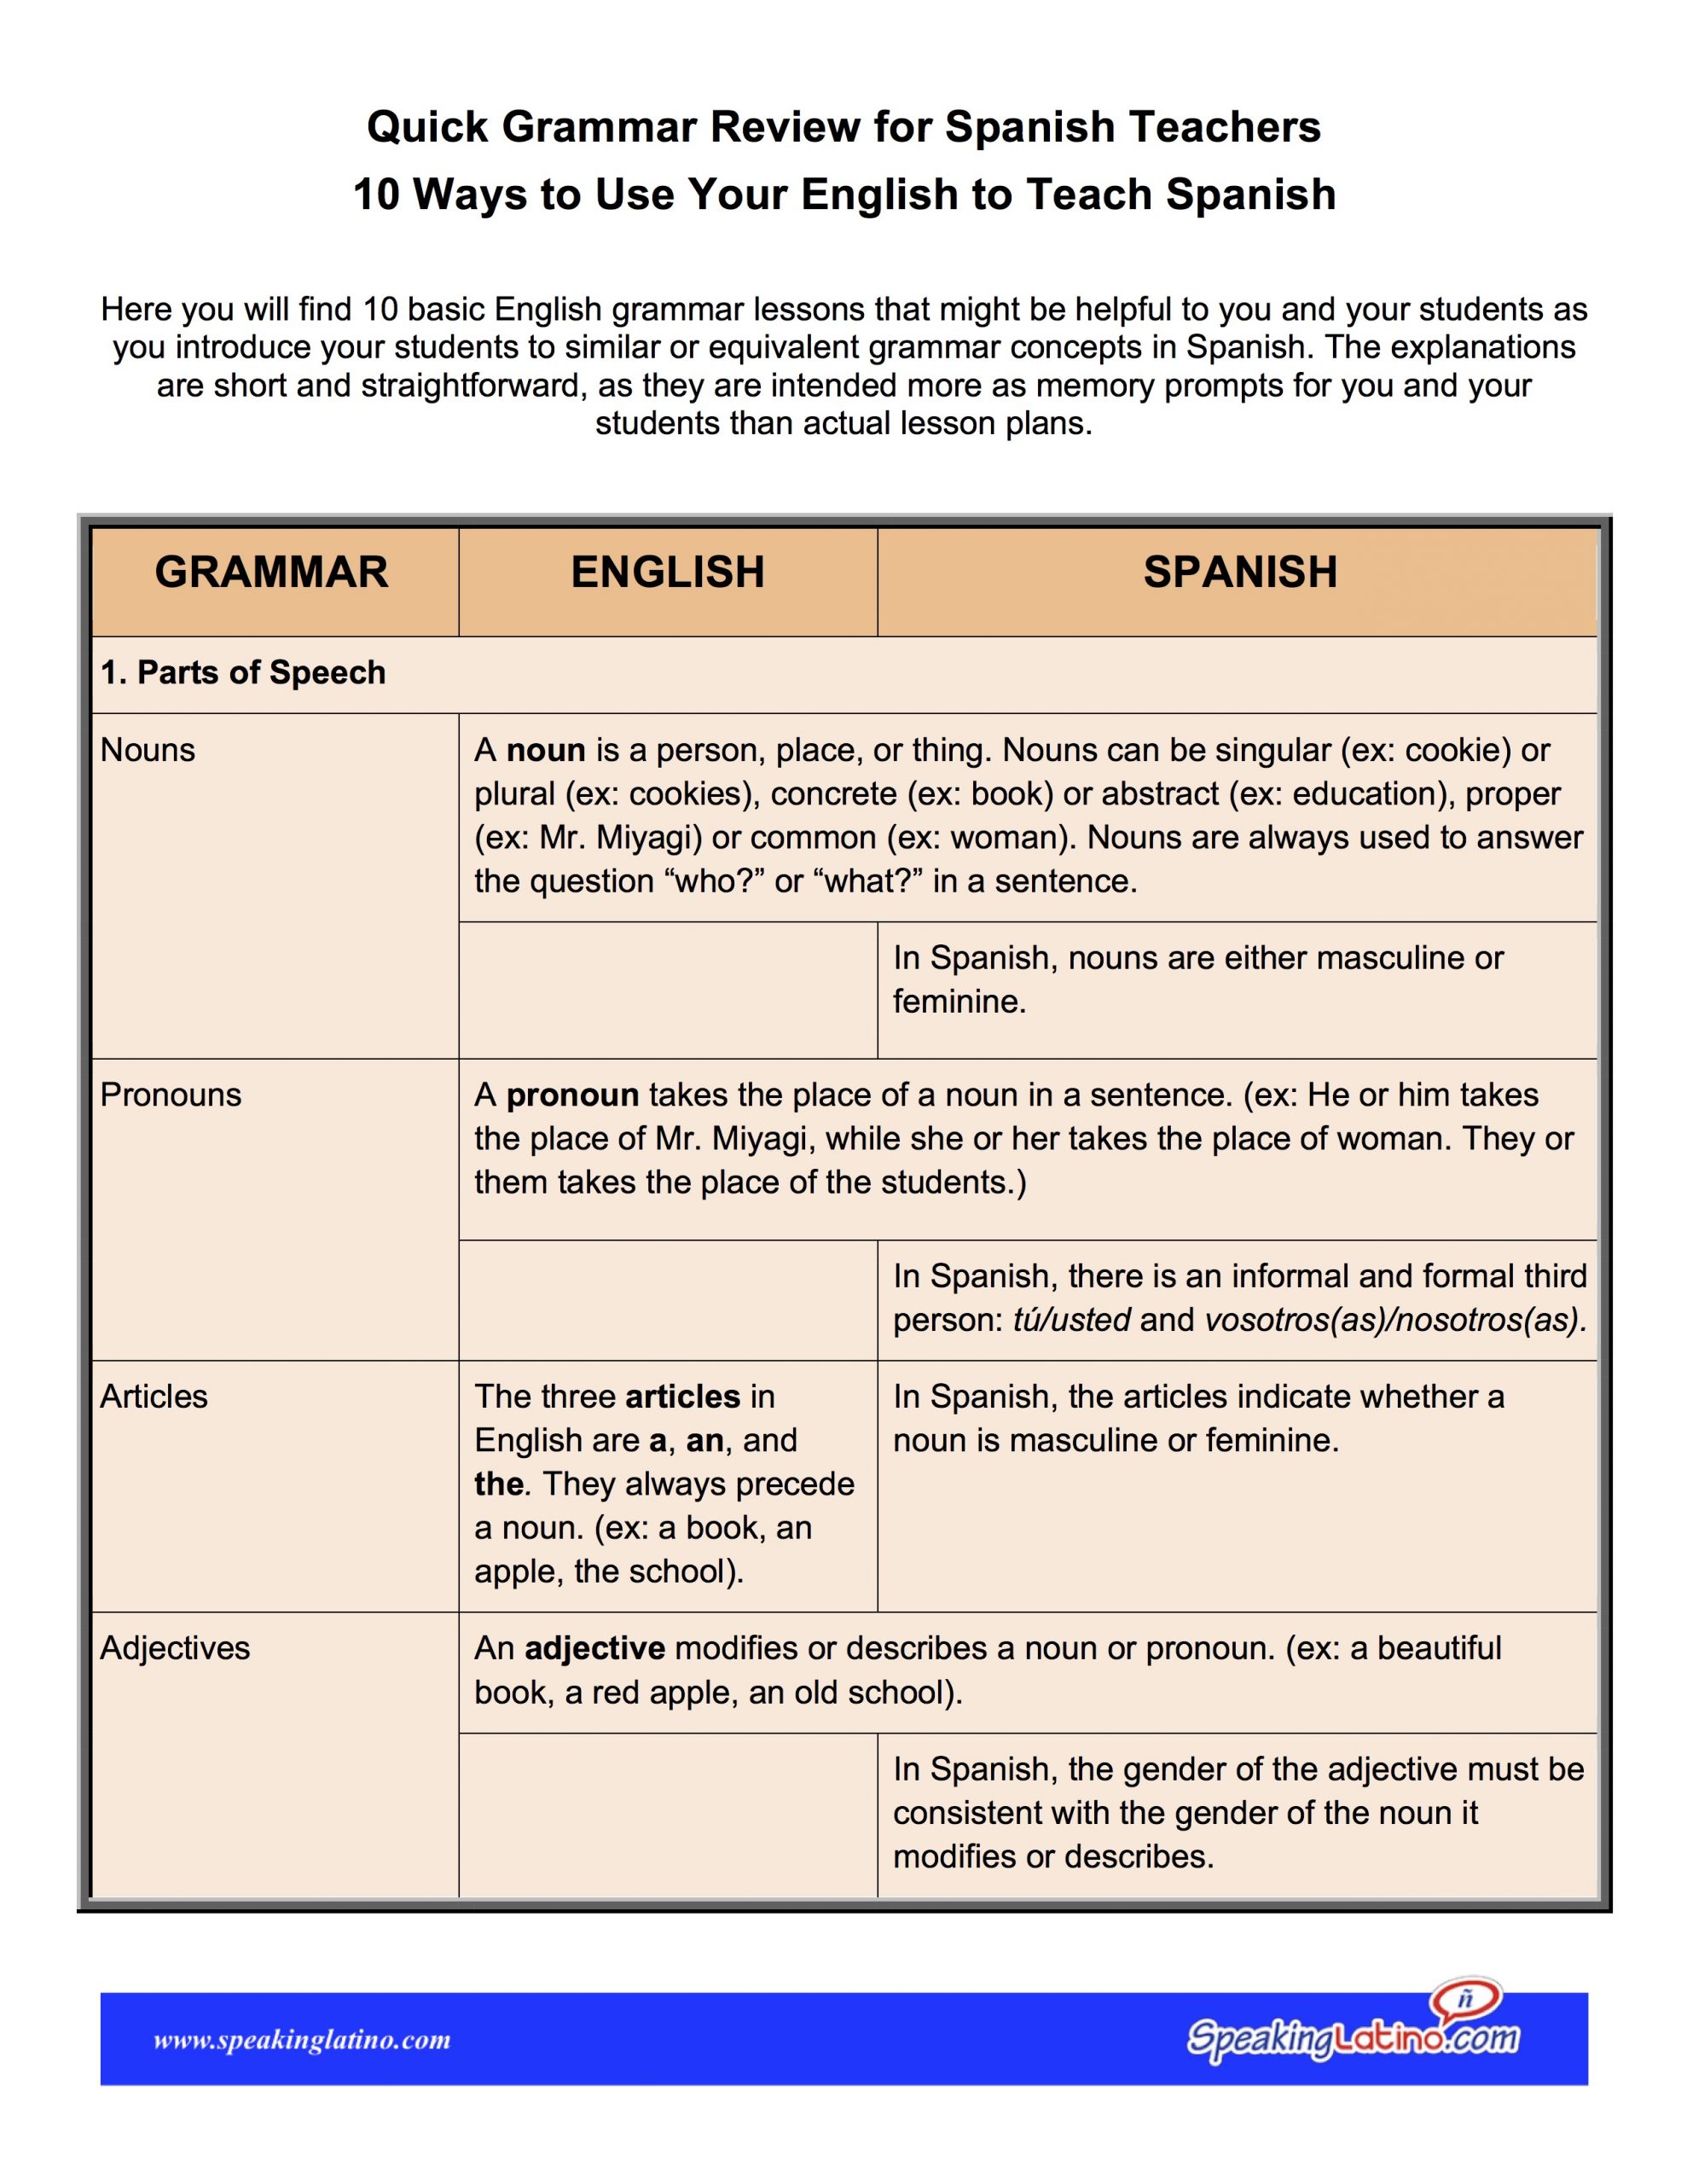 Quick Grammar Review For Spanish Teachers: 10 Ways To Use